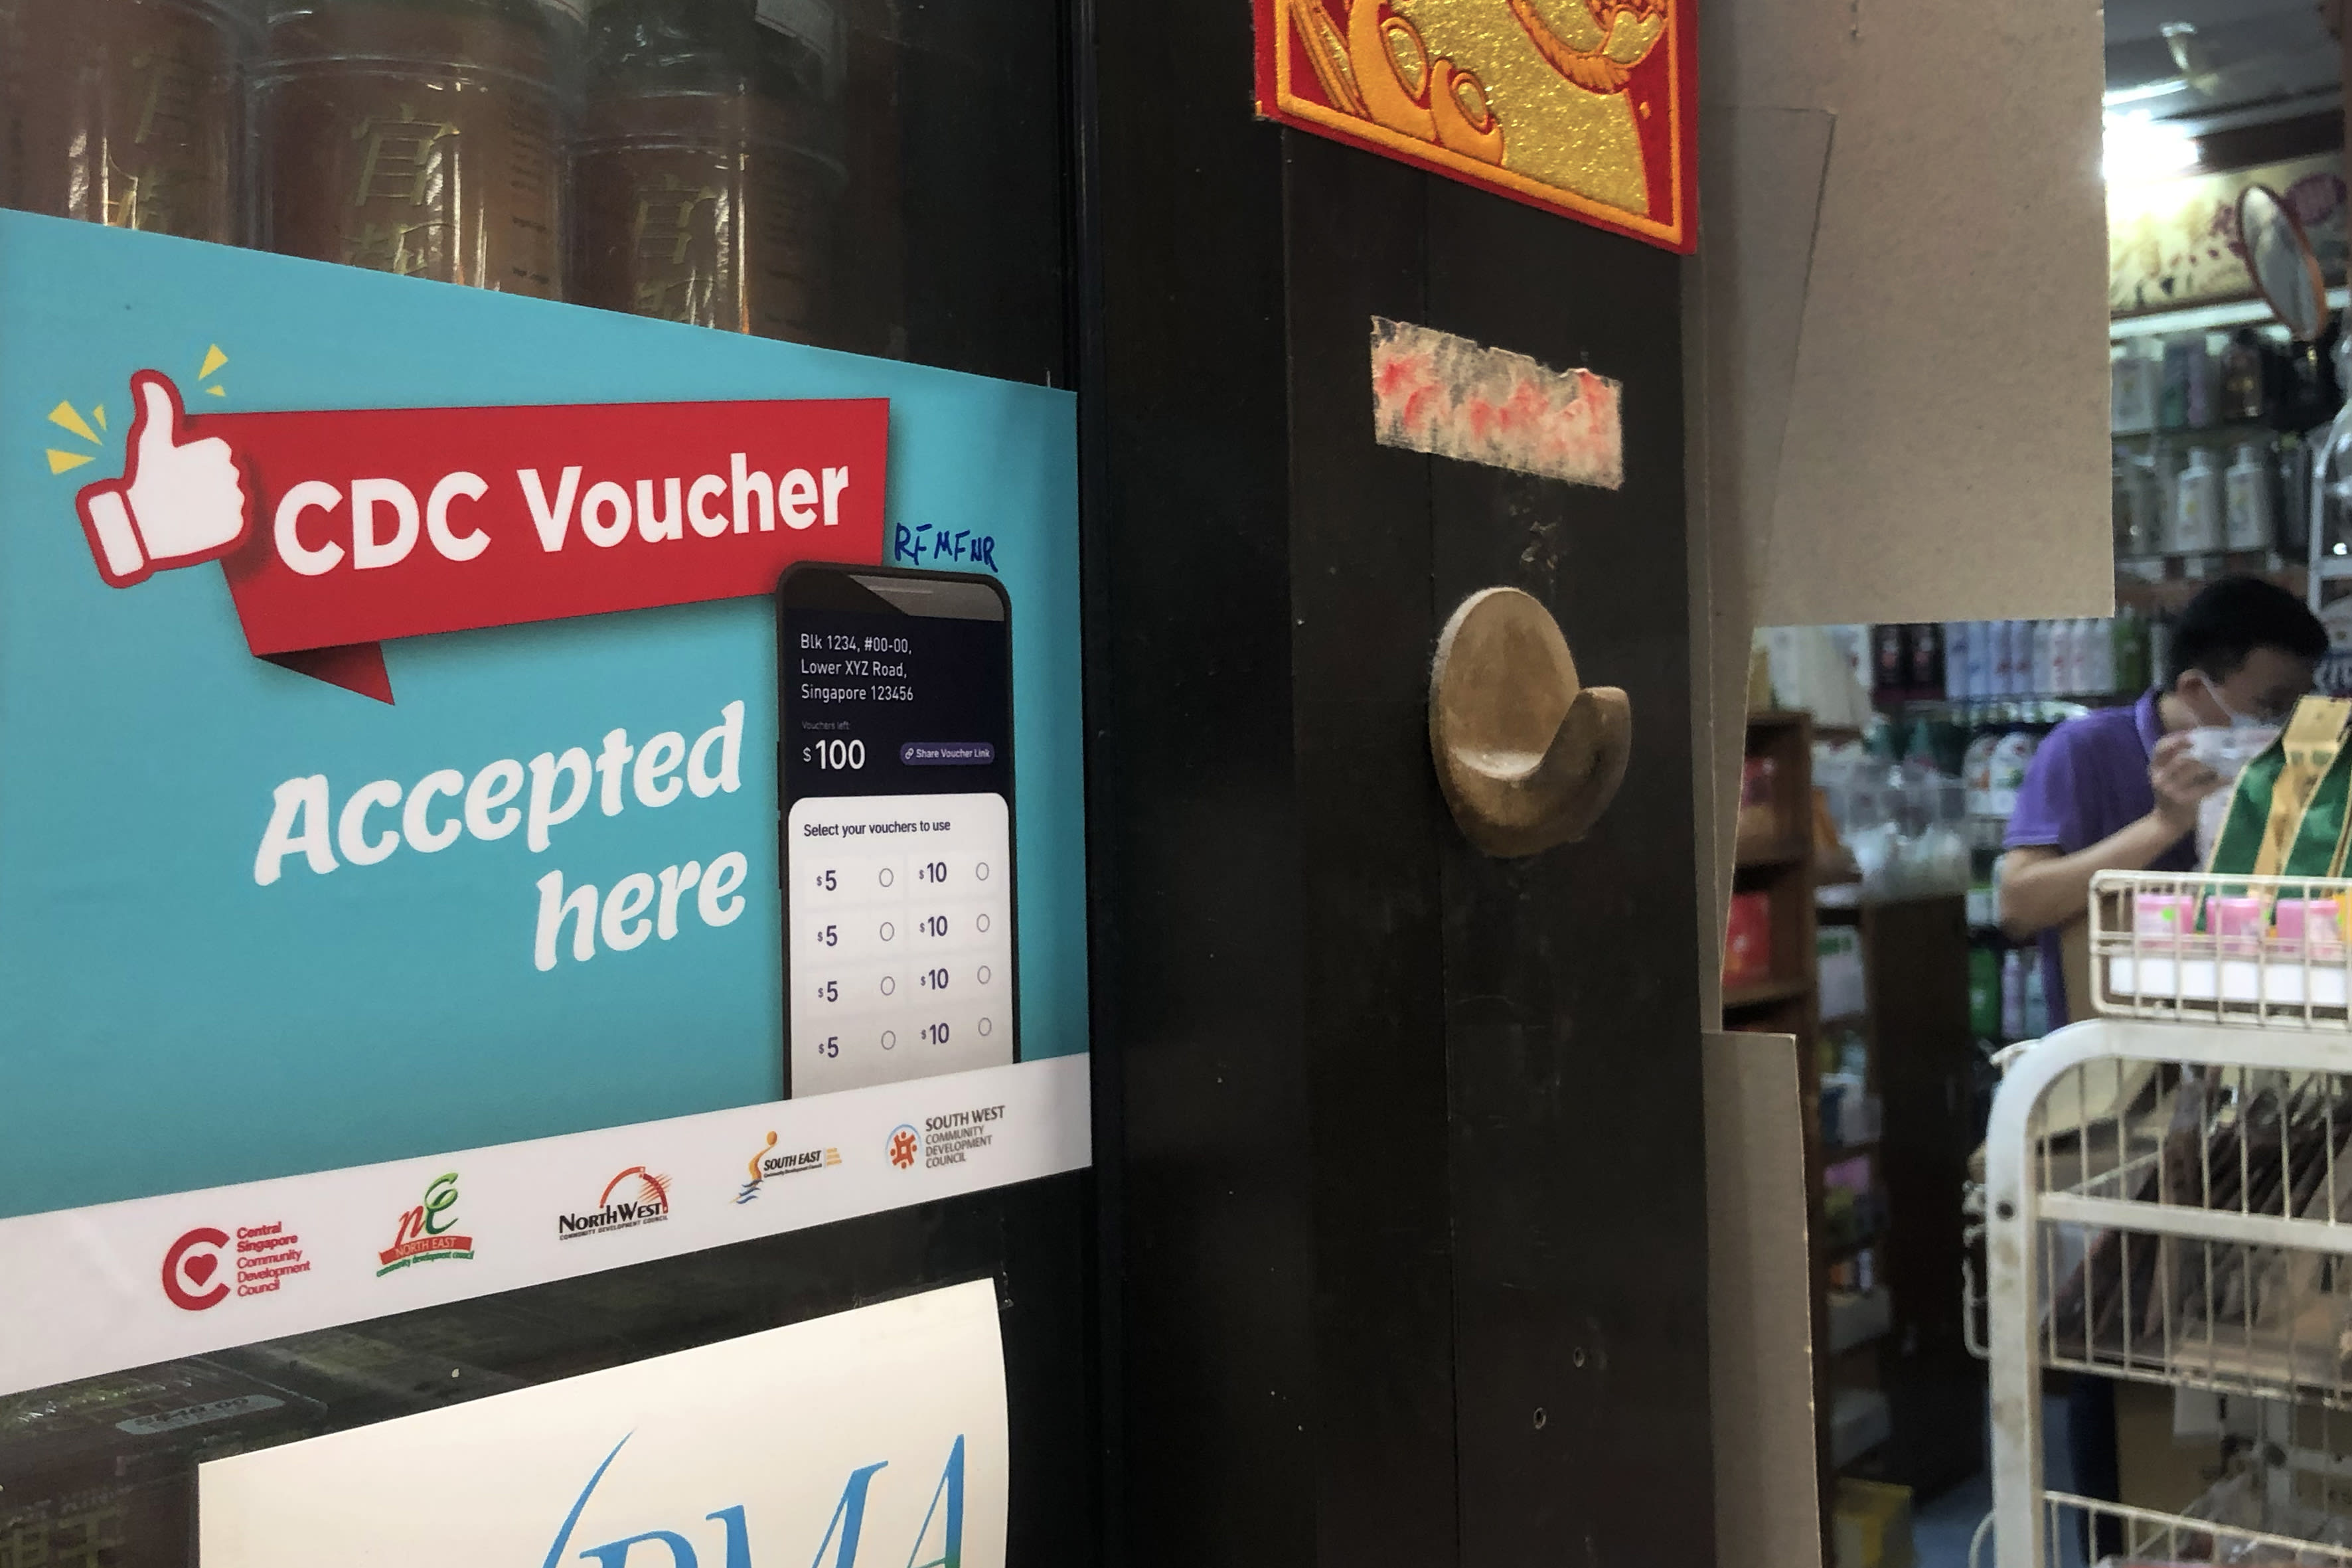 Through the CDC Vouchers Merchants Go Where webpage, members of the public will be able to key in their postal code or street name online to find vendors nearest to them and redeem the vouchers.